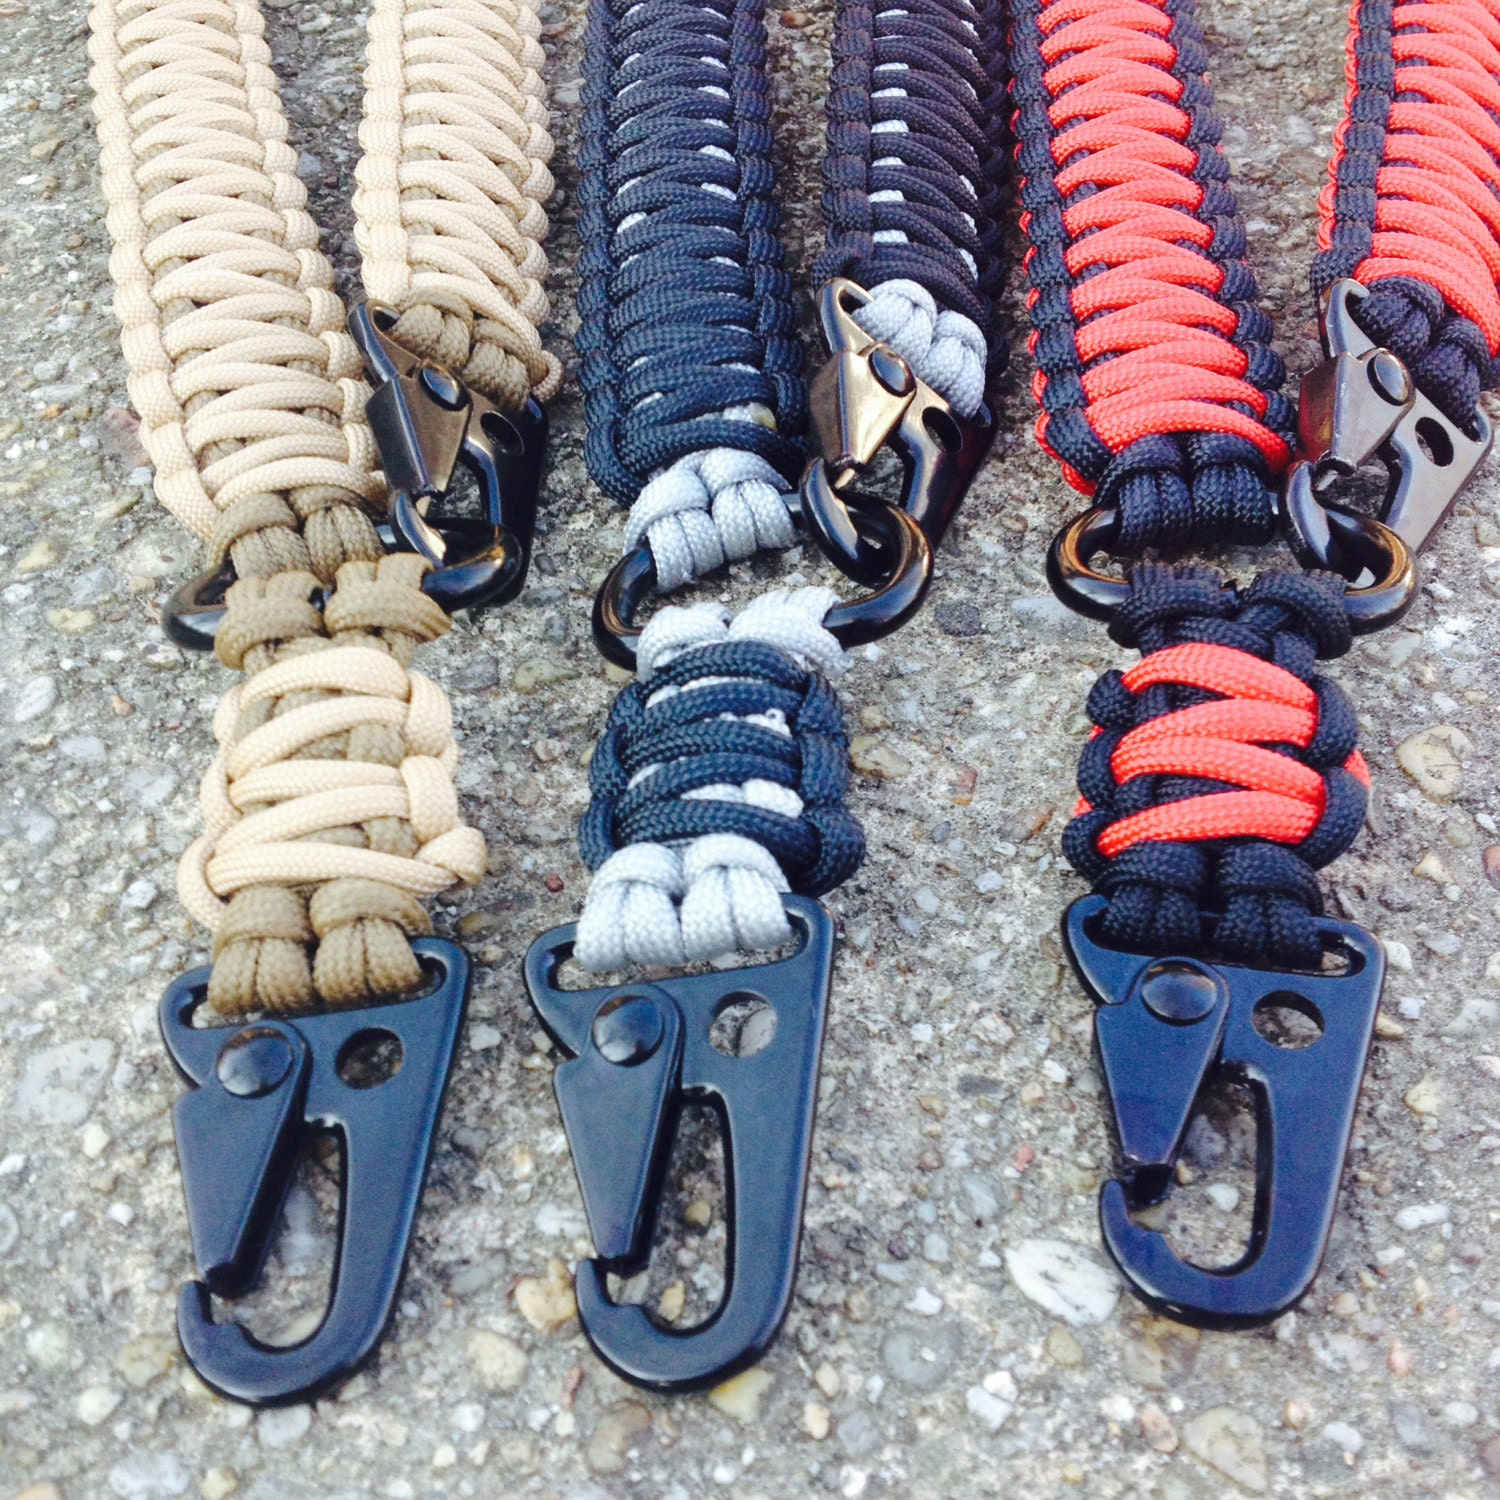 1 and 2 point 550 paracord Rifle slings